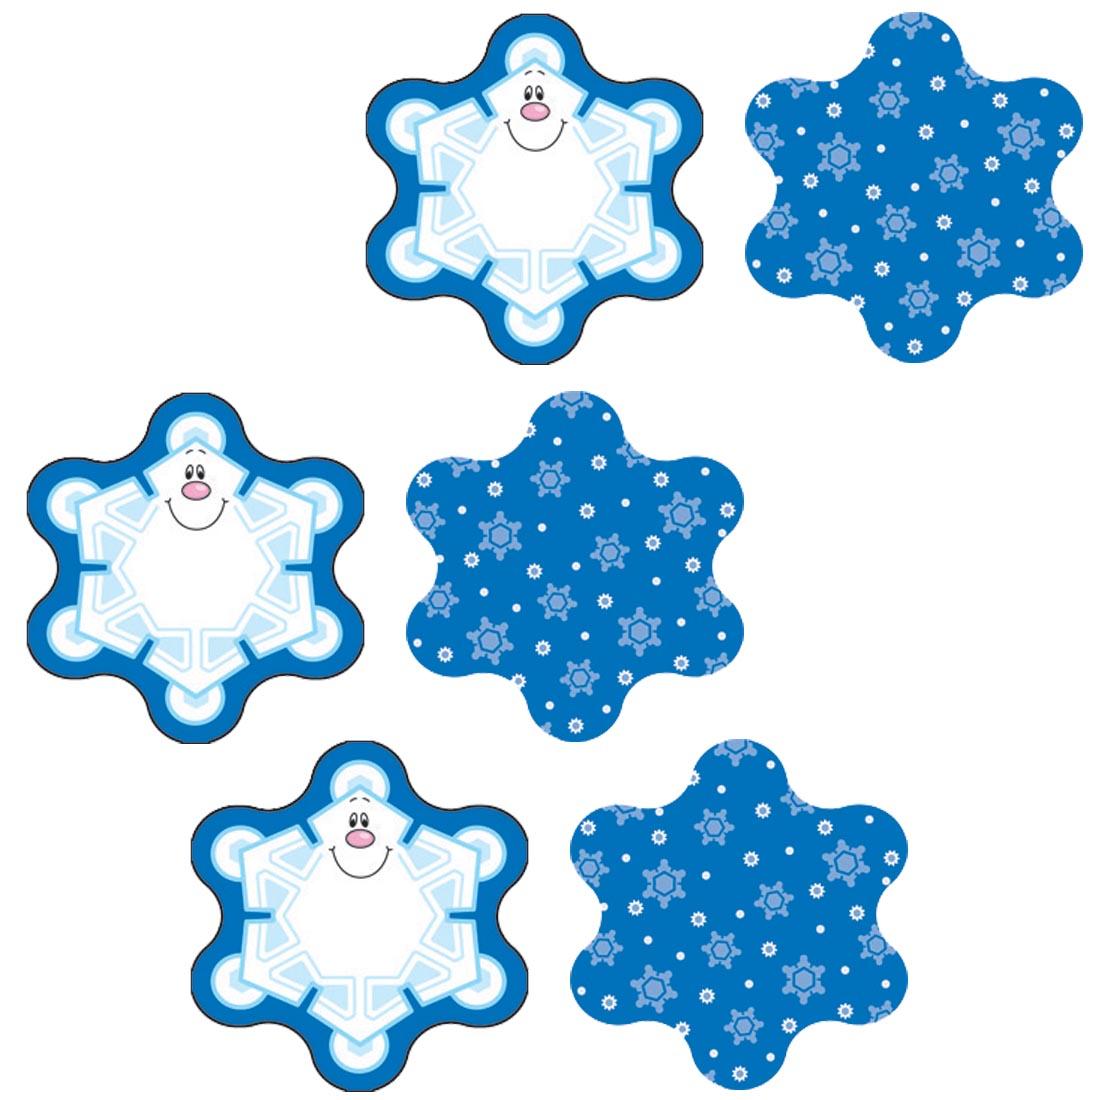 Front and Back Sides of Snowflakes Mini Cut-Outs by Carson Dellosa